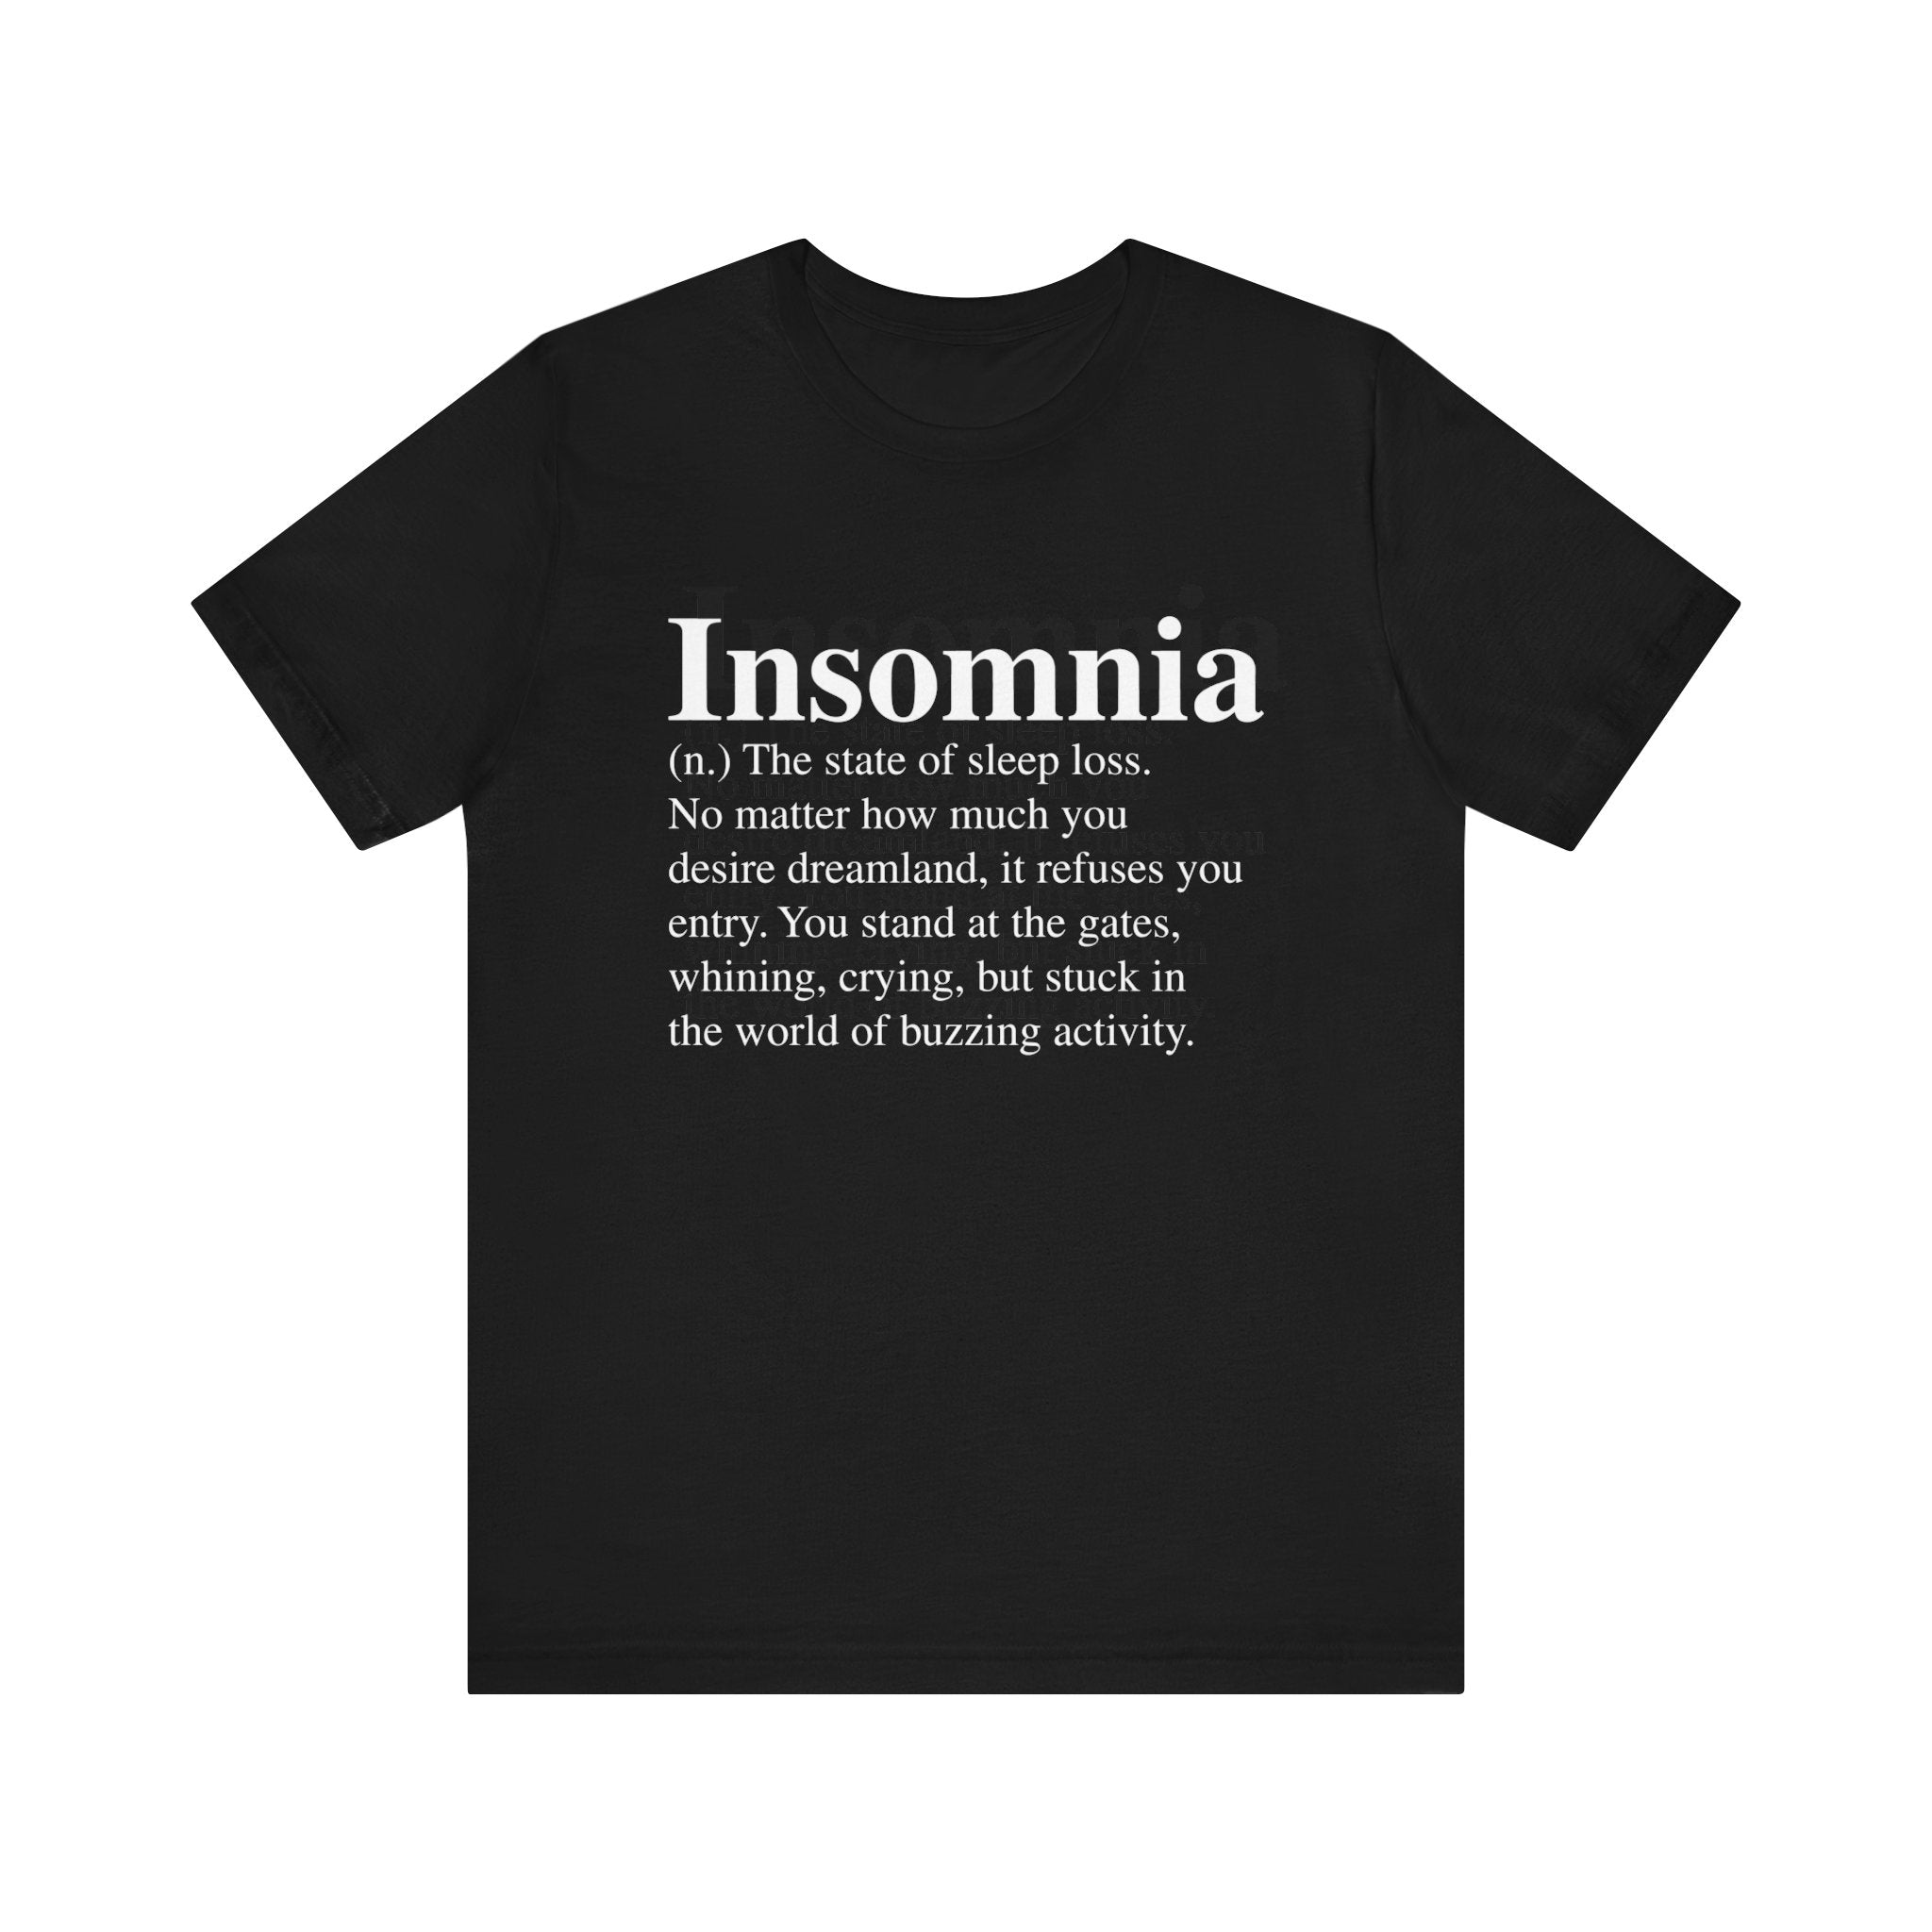 Insomnia T-Shirt featuring the word "Insomnia" and its definition in a quality print, with white text on the front.